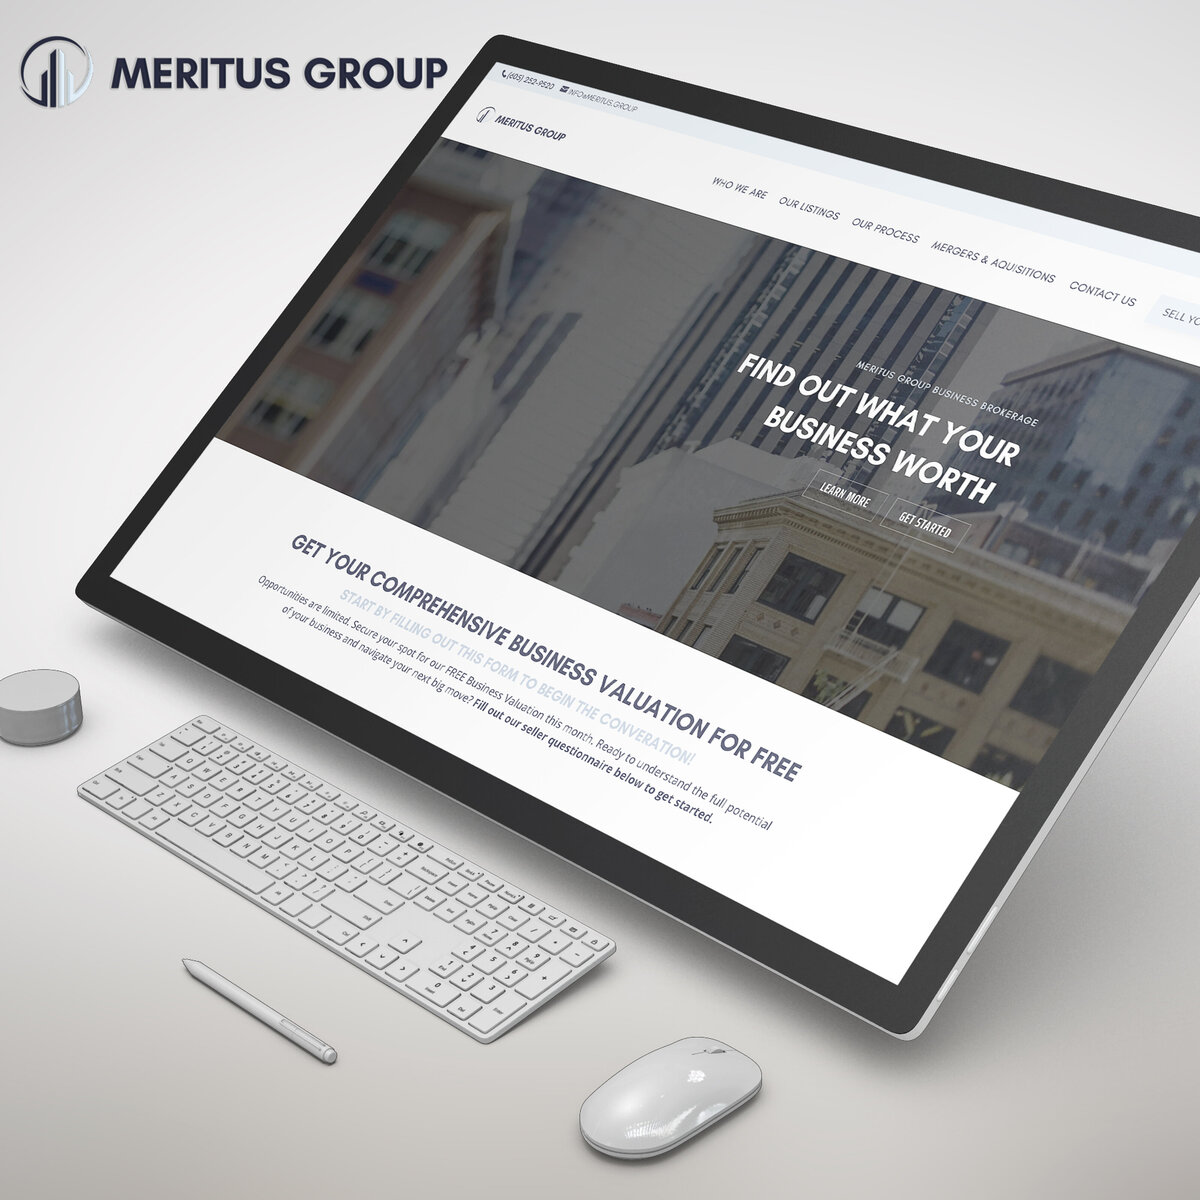 Lead the business brokerage sector with Meritus Group, powered by The Agency's superior web and branding services. Our customized approach ensures your brand stands out and speaks directly to your target market.